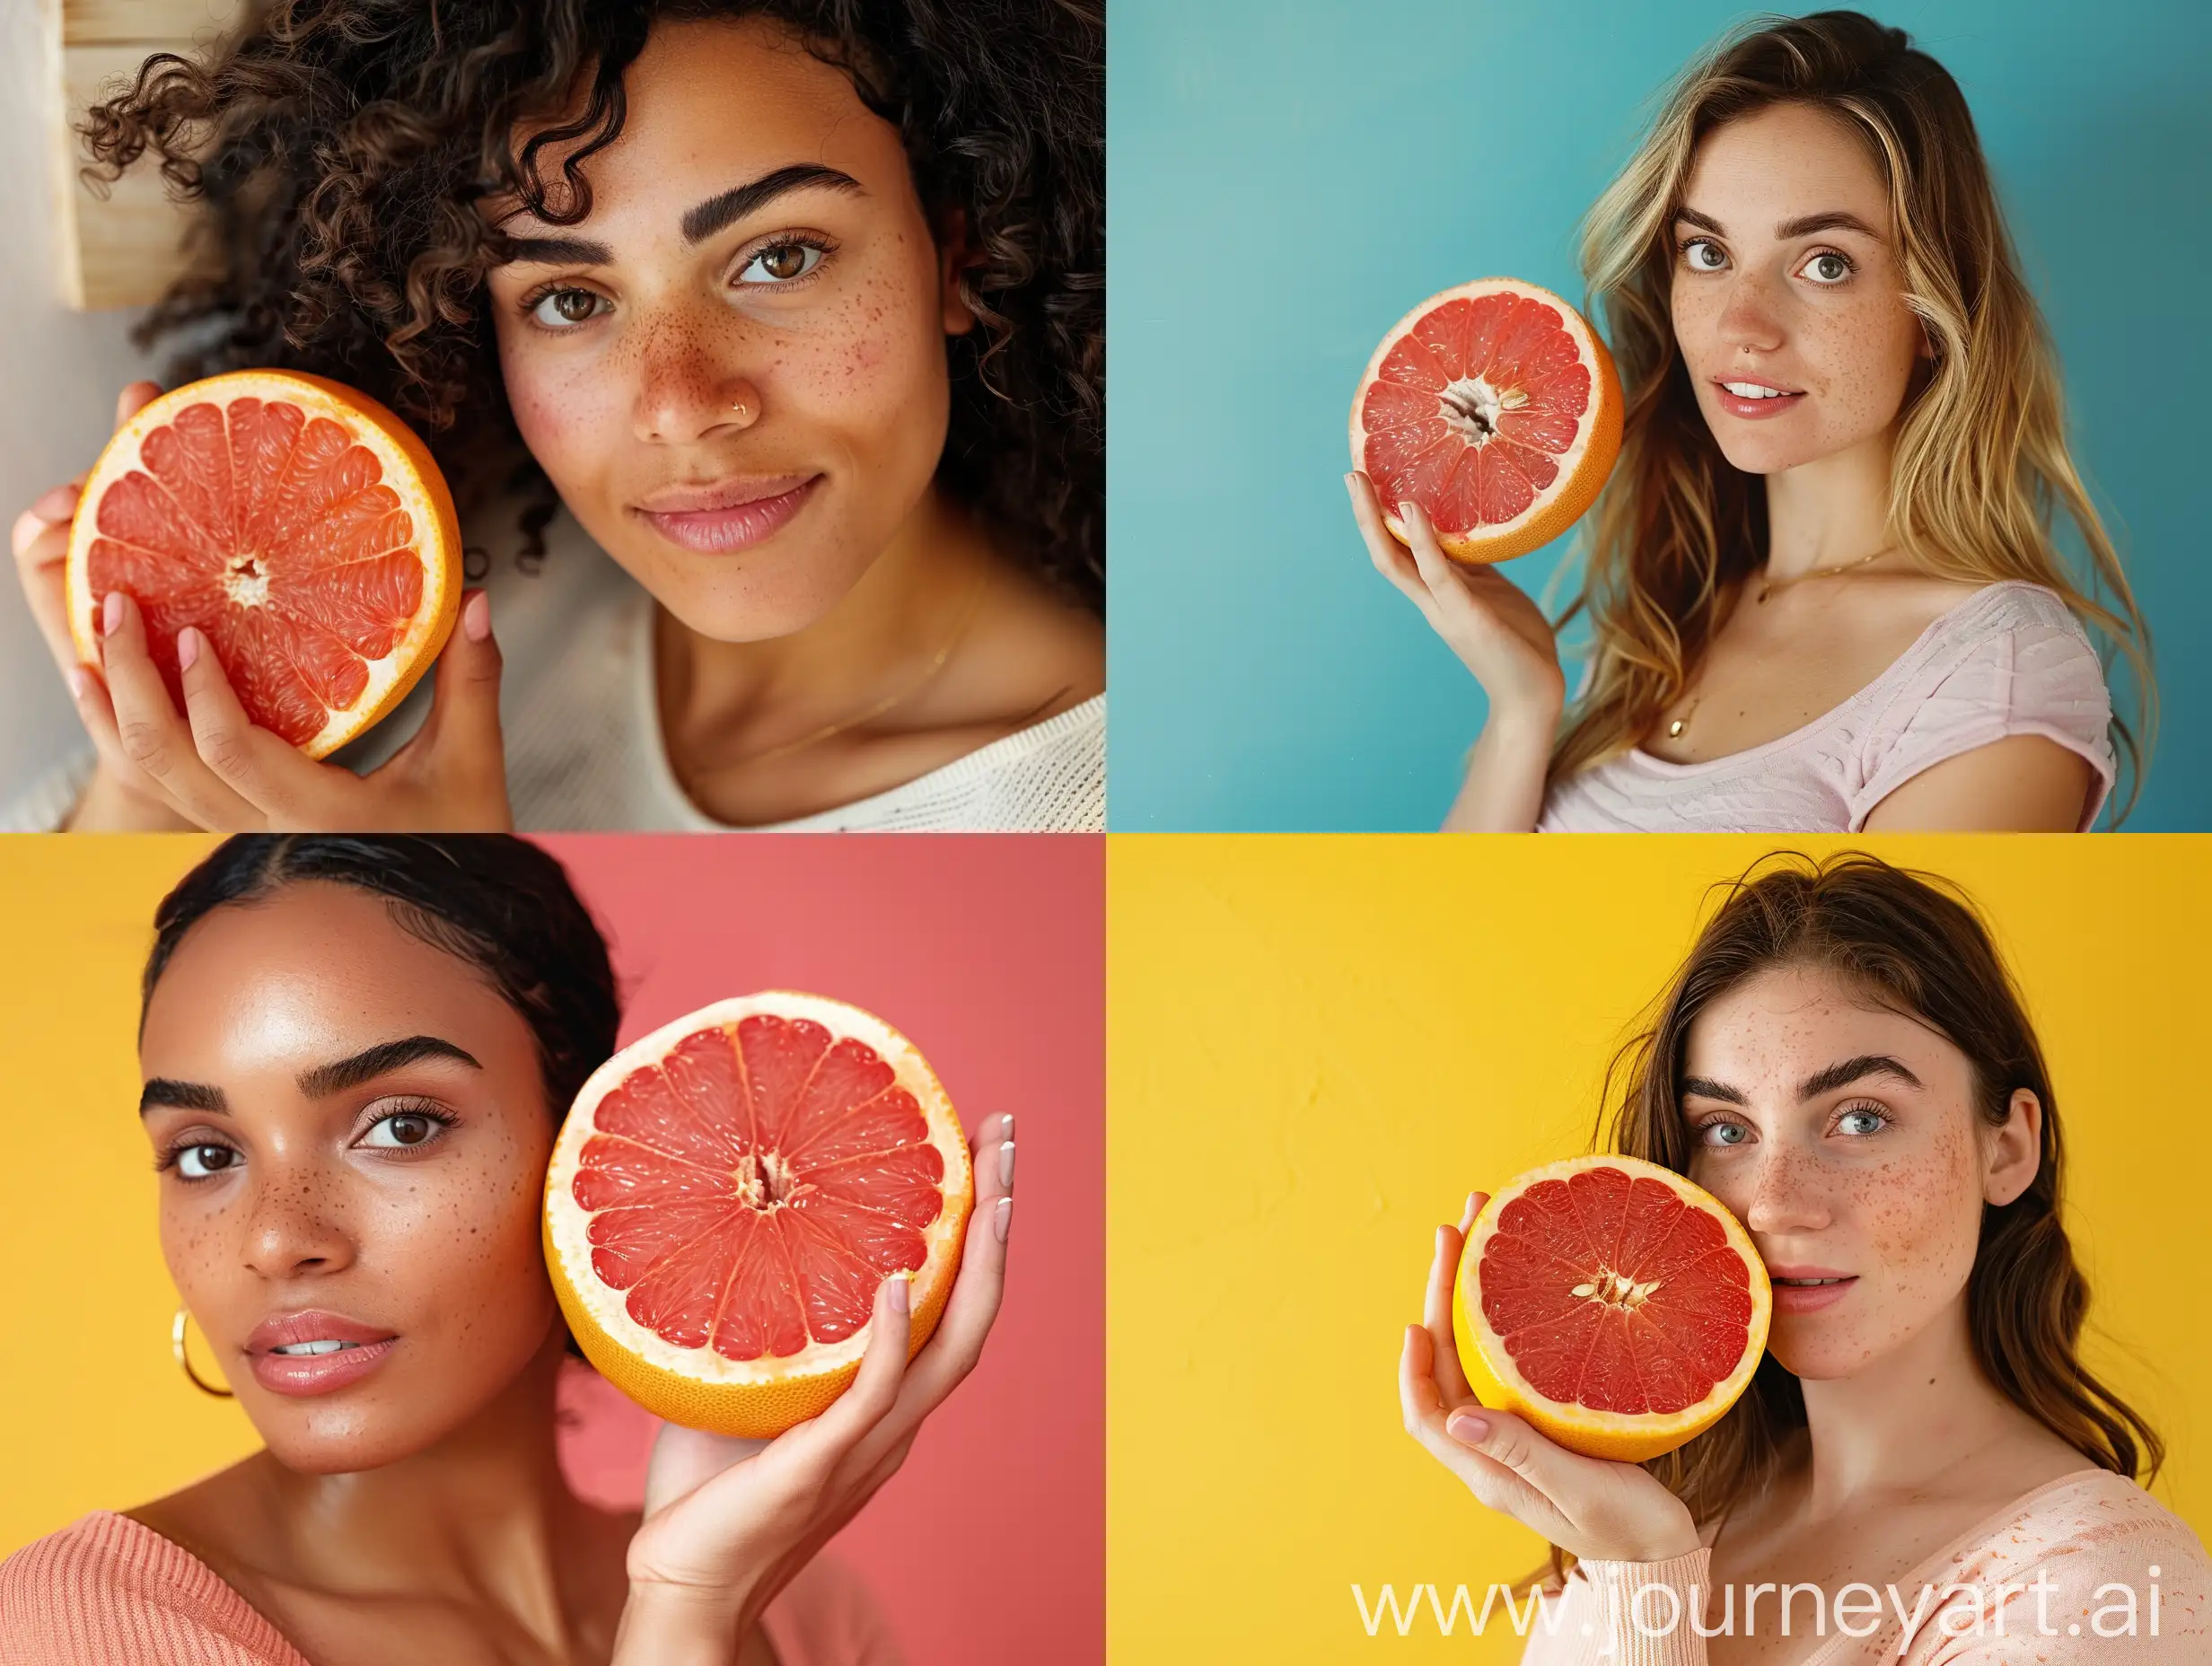 Advertising photo of a woman holding a grapefruit